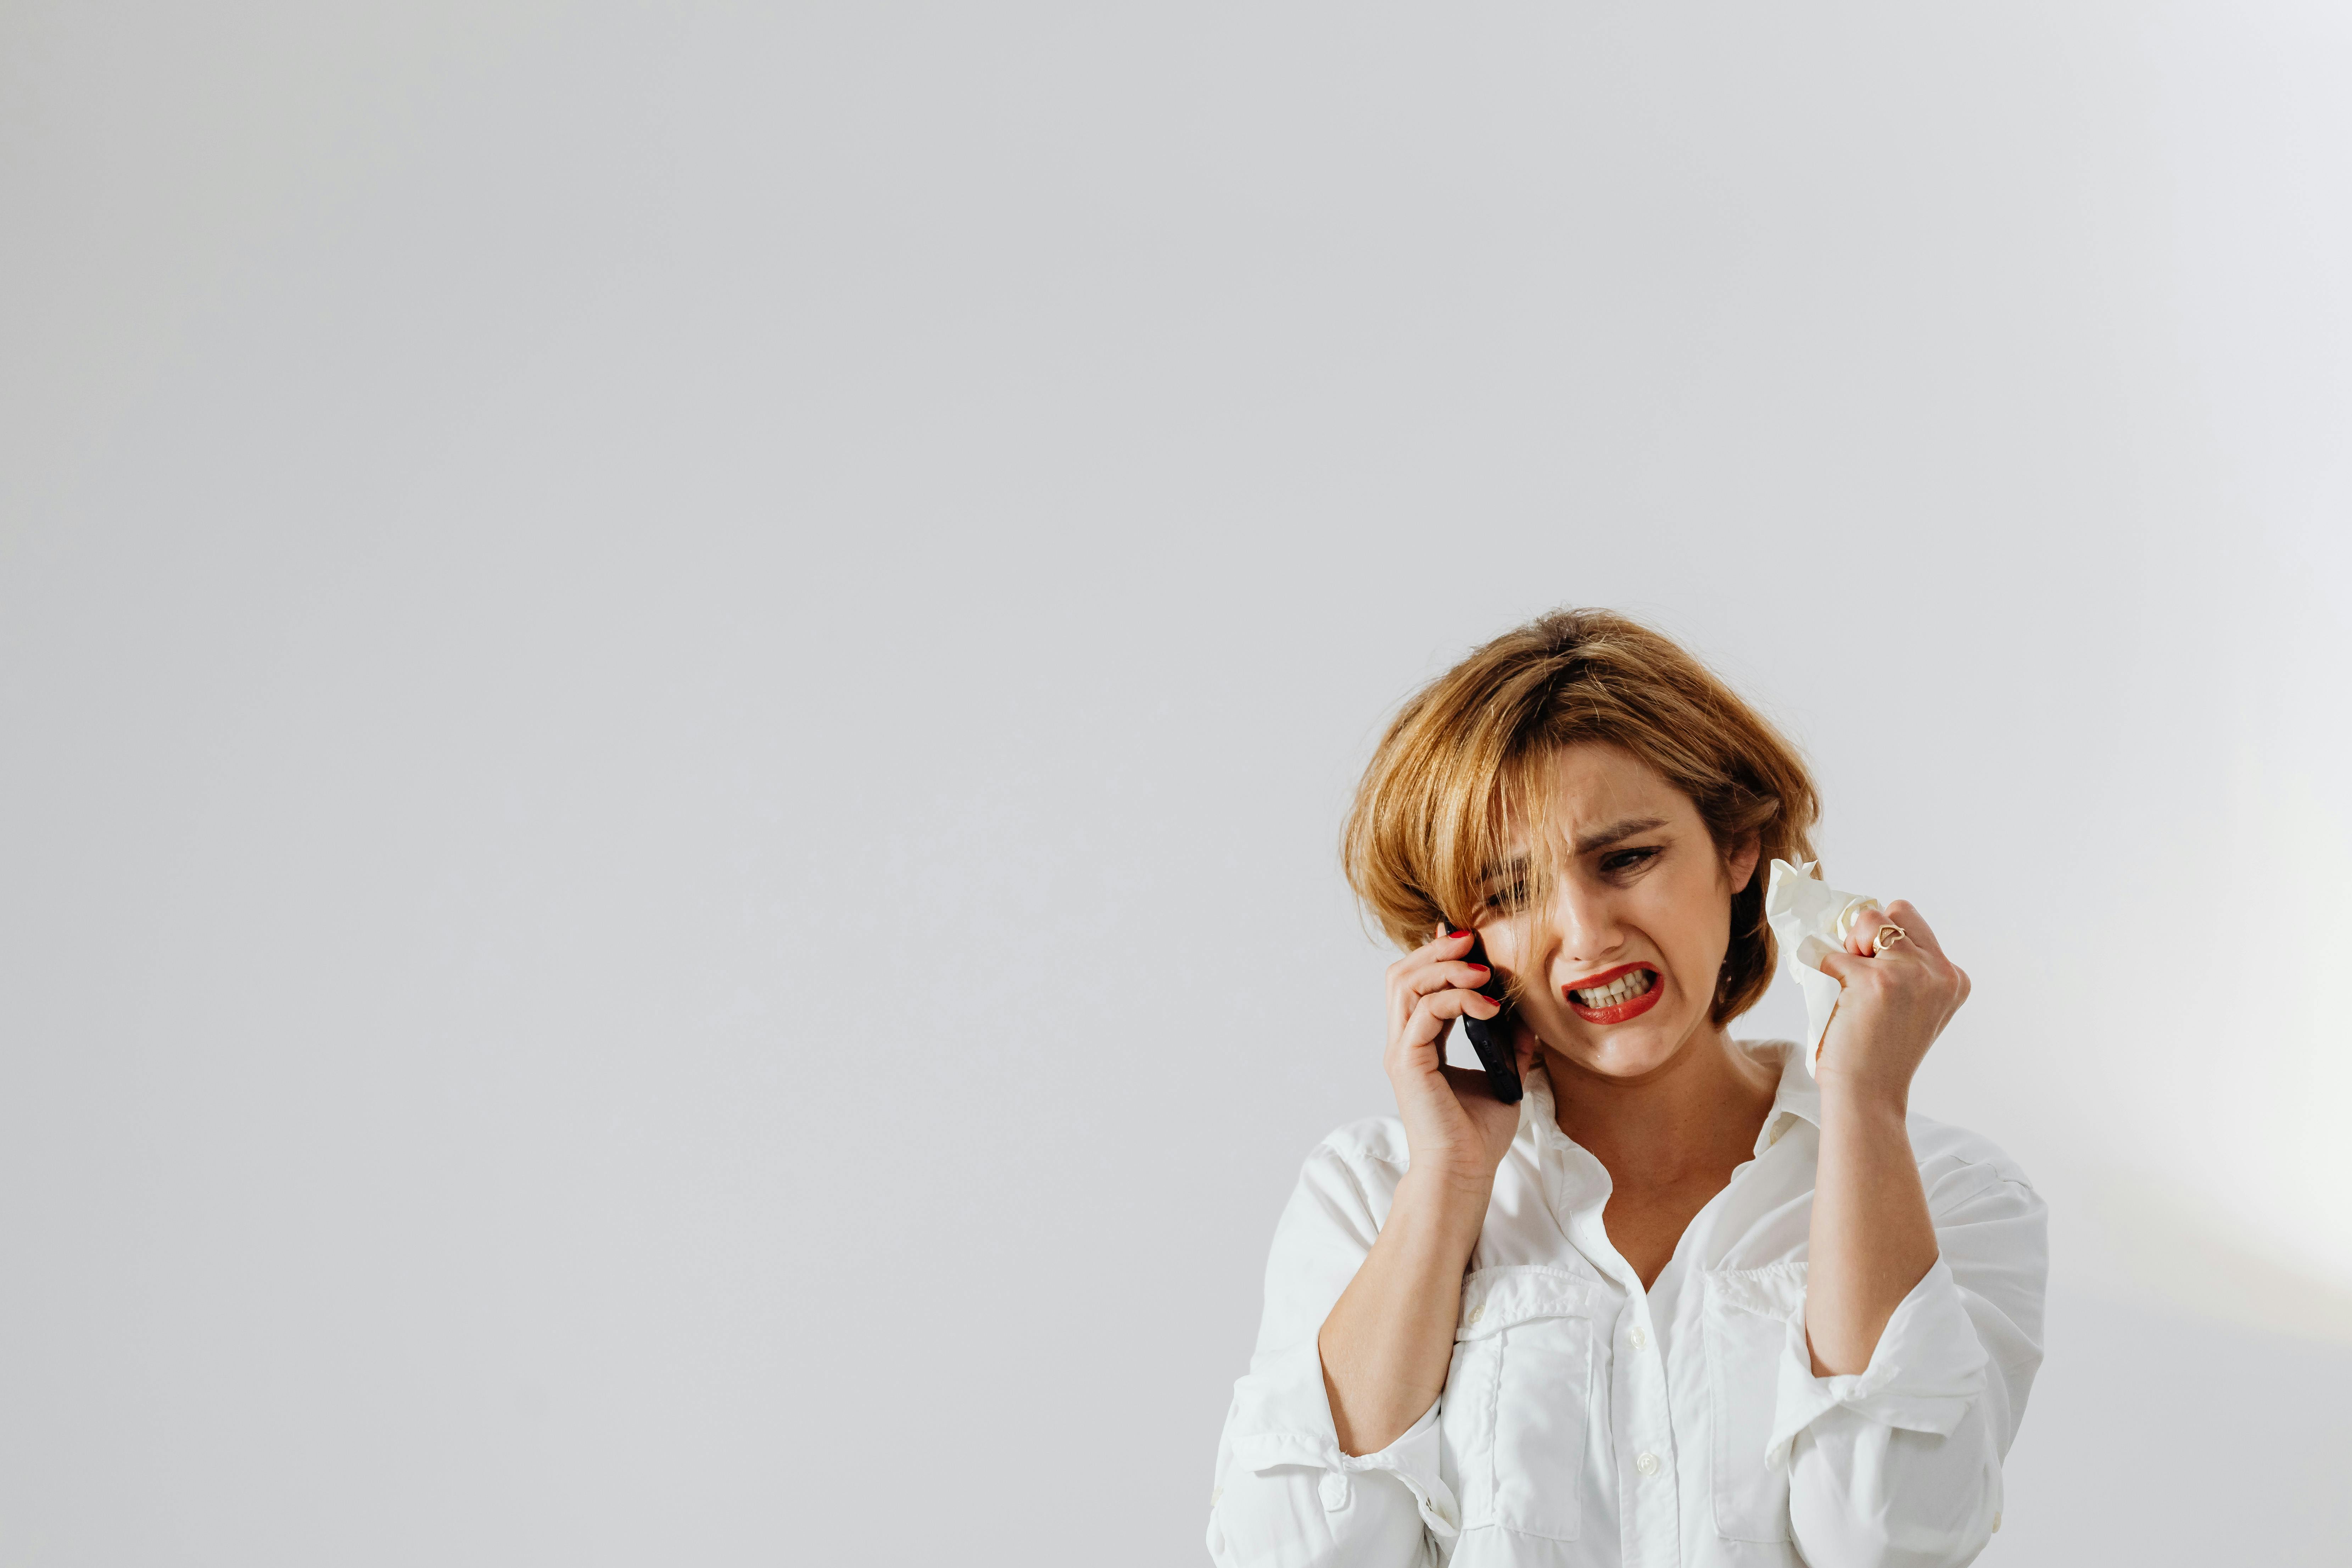 Angry woman talking on the phone | Source: Pexels